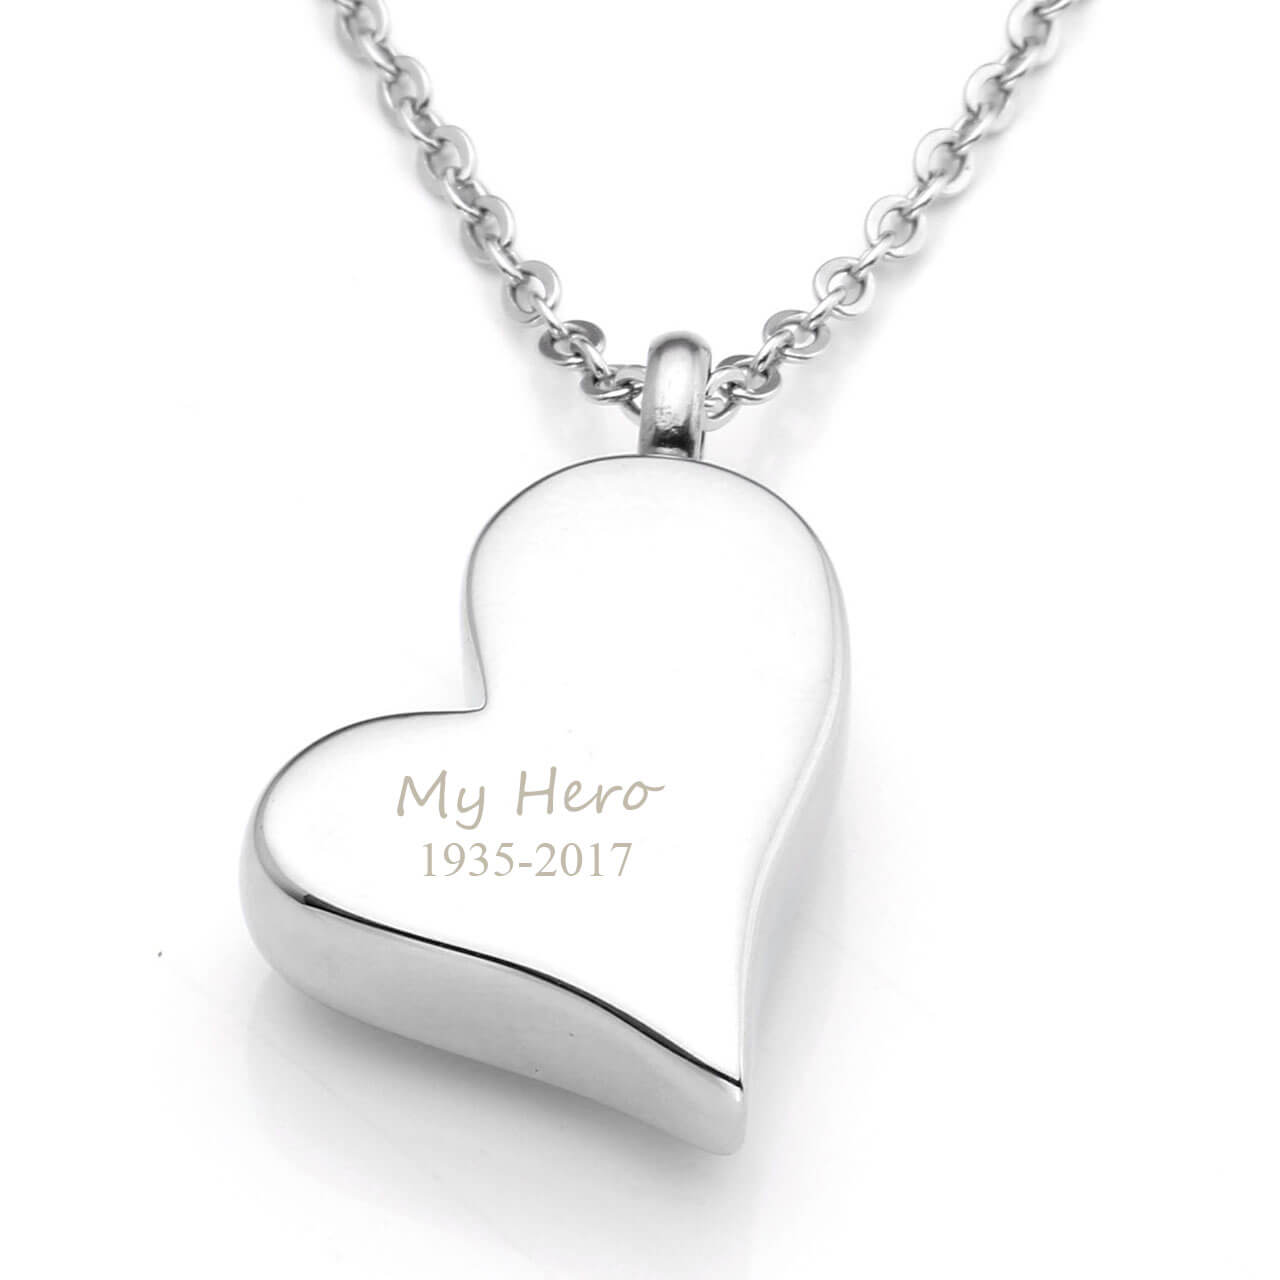 Backside of the heart pendant necklace, jng049901